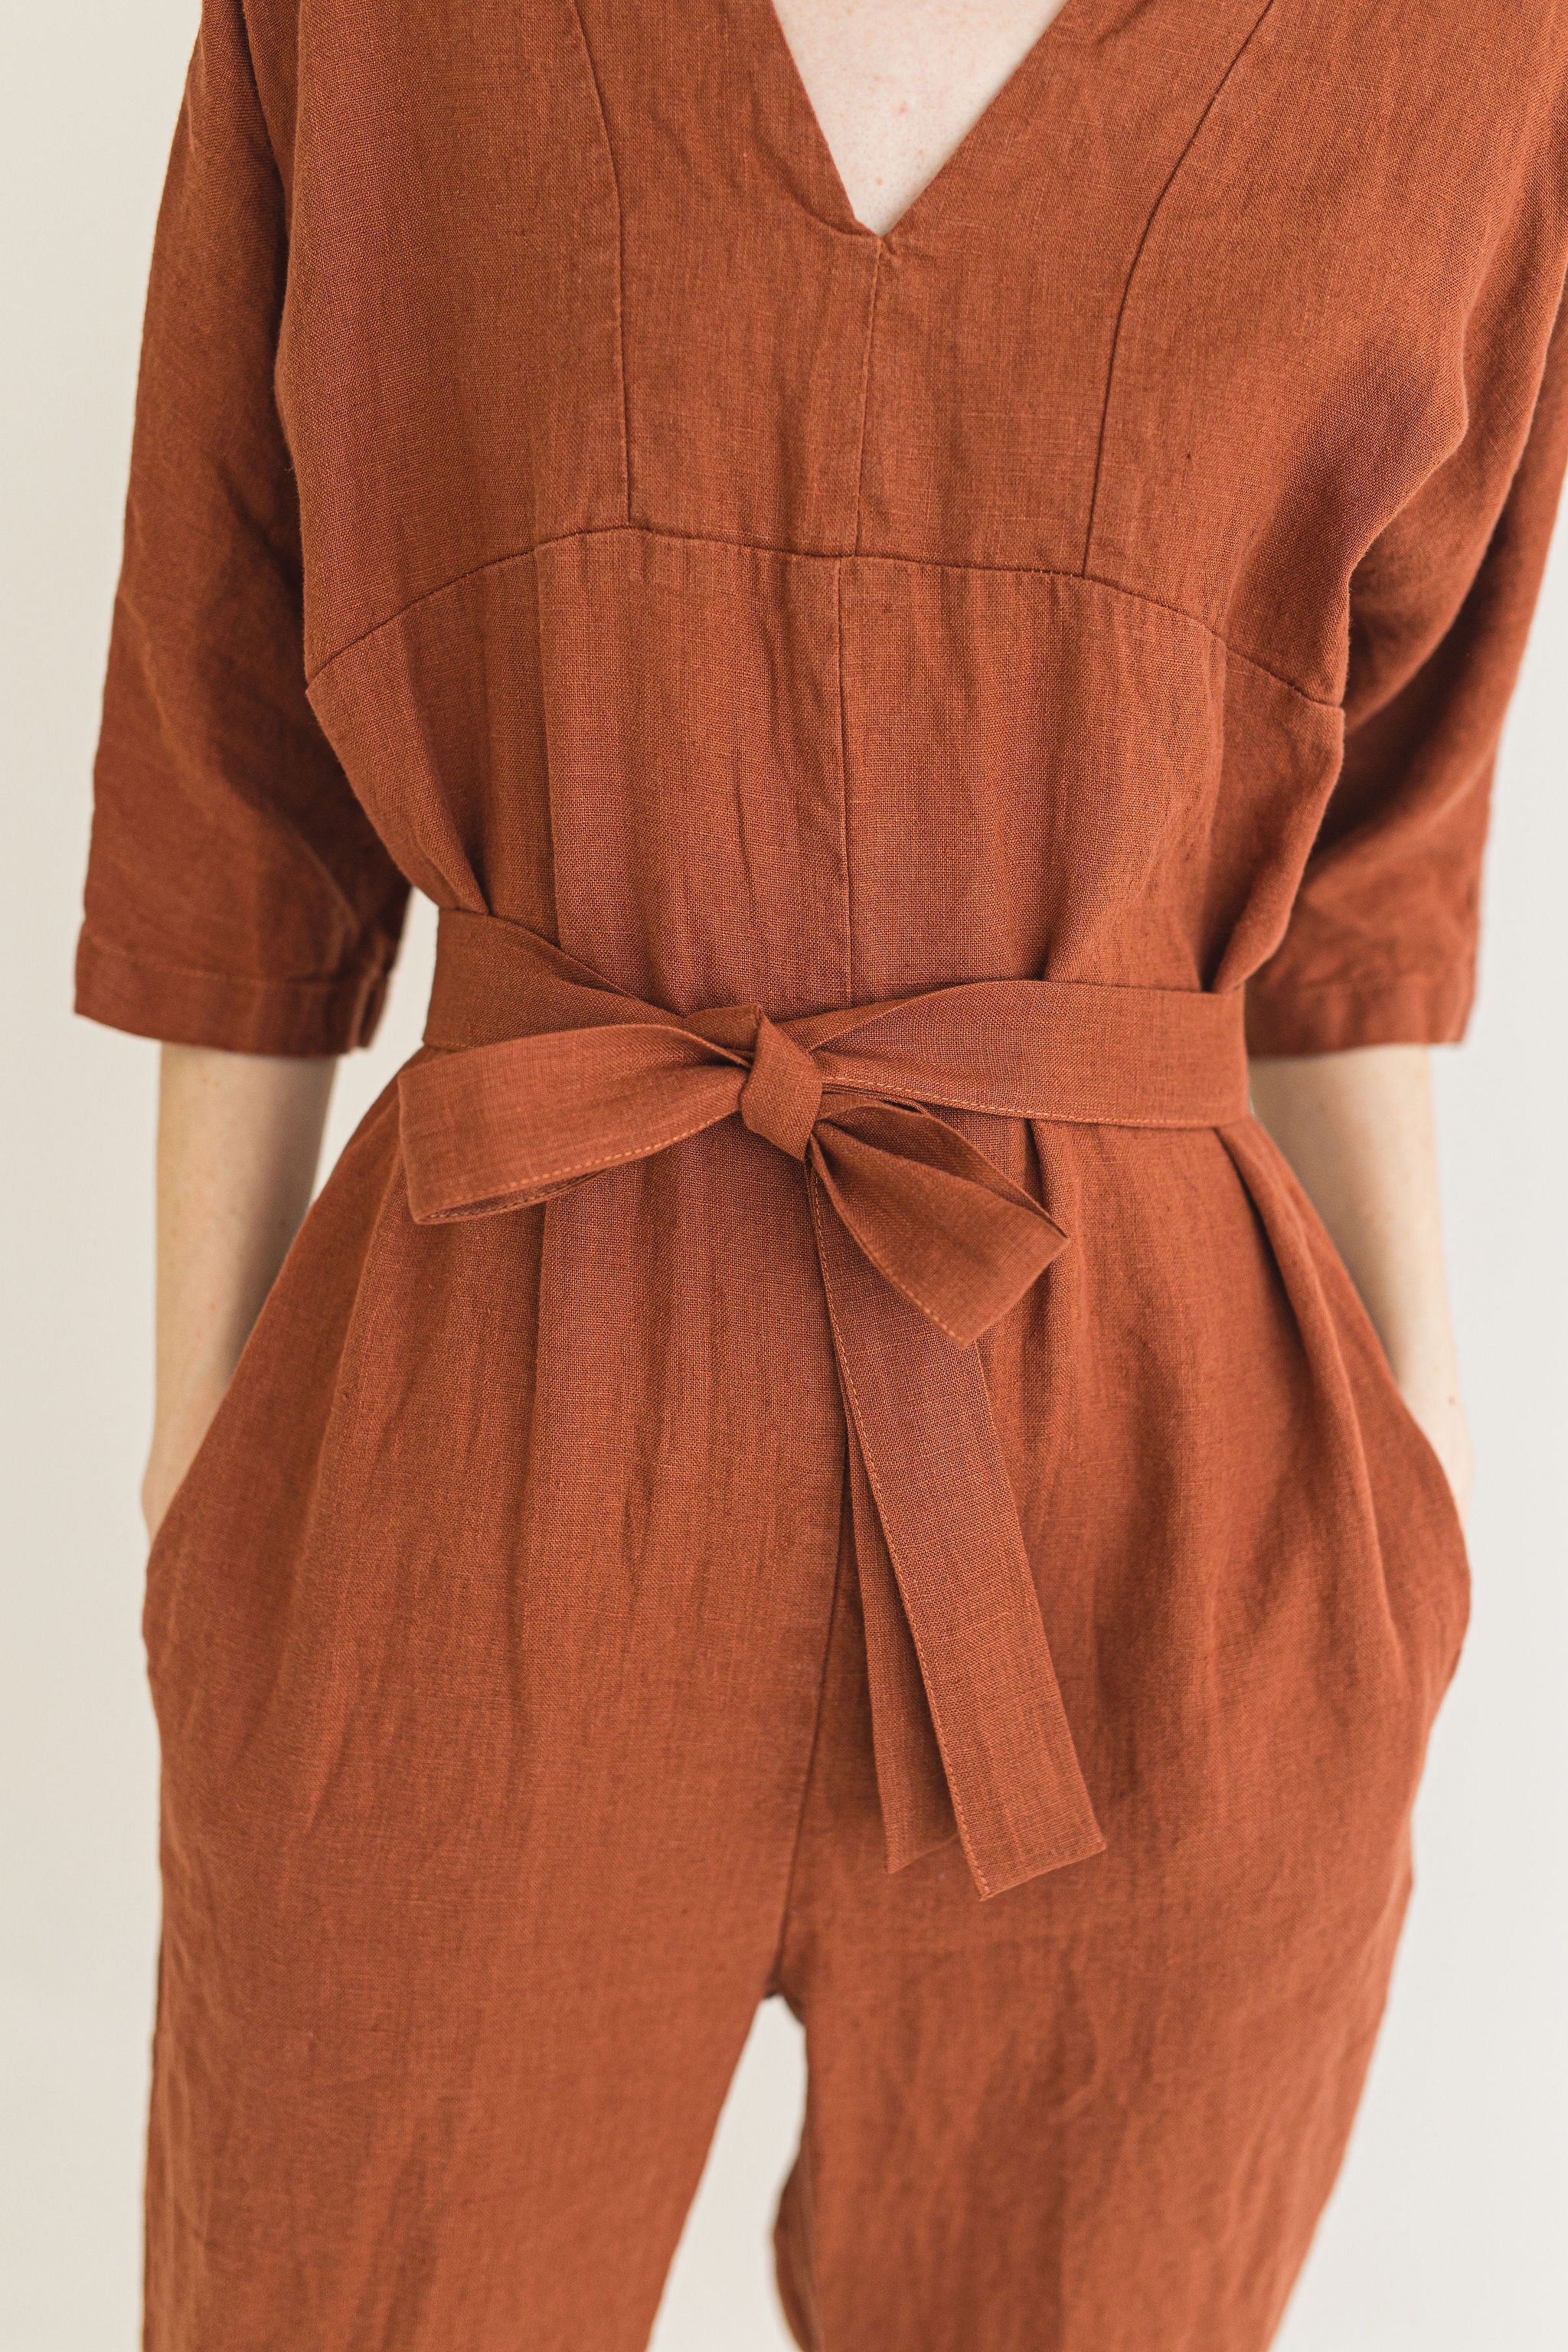 Linen Jumpsuit with Kimono Style Sleeves Epic Linen